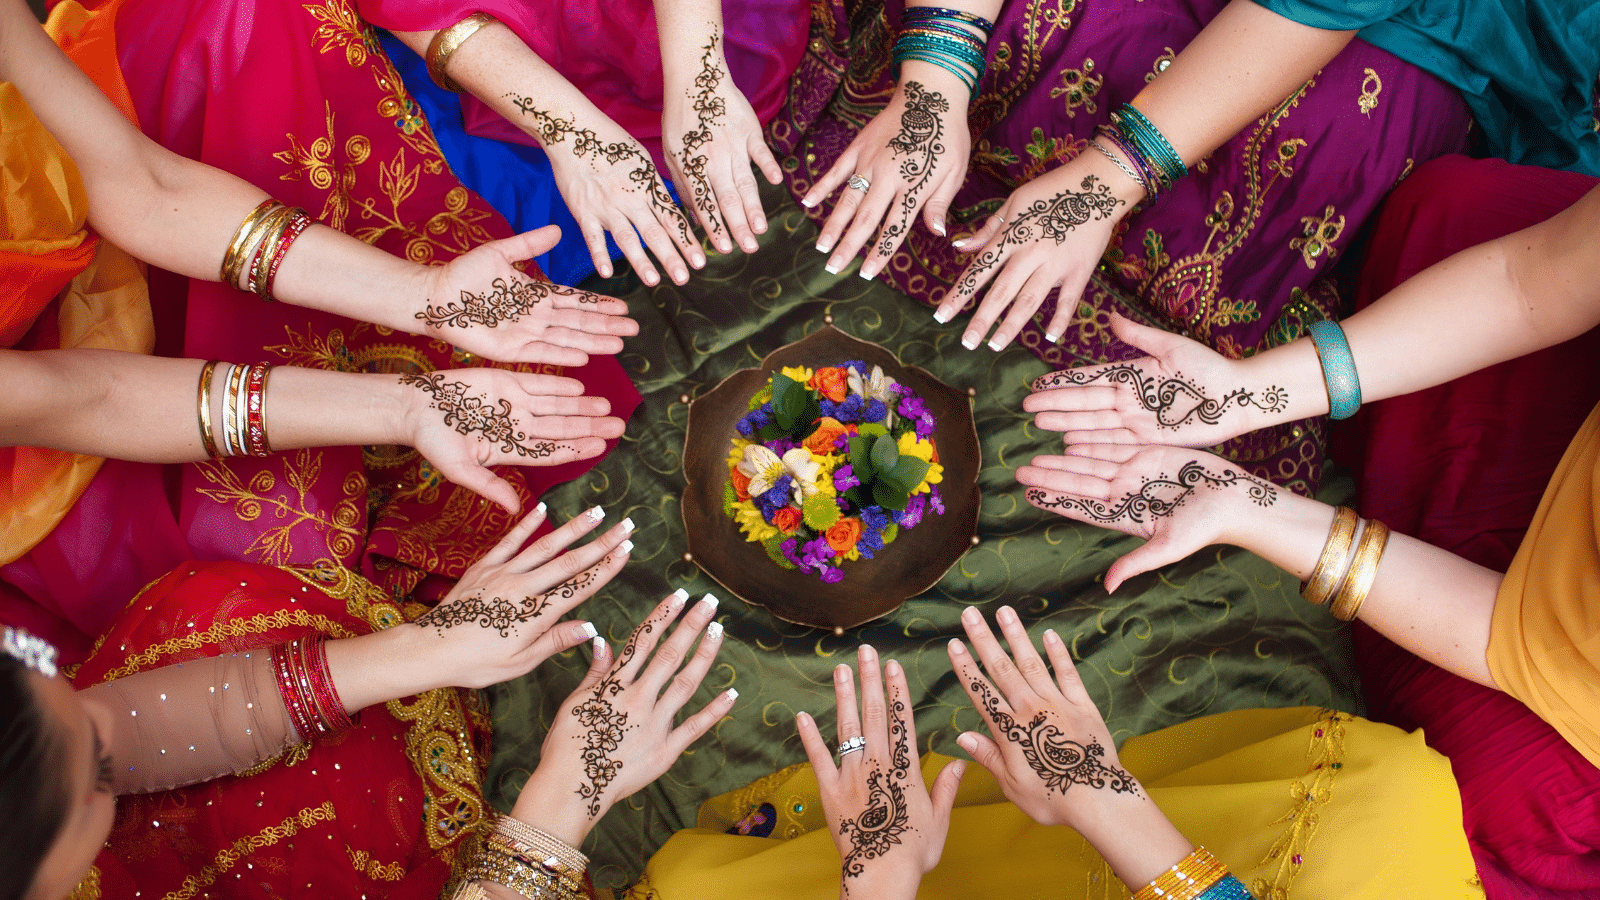 Women's hands decorated with henna tatoos in a circle